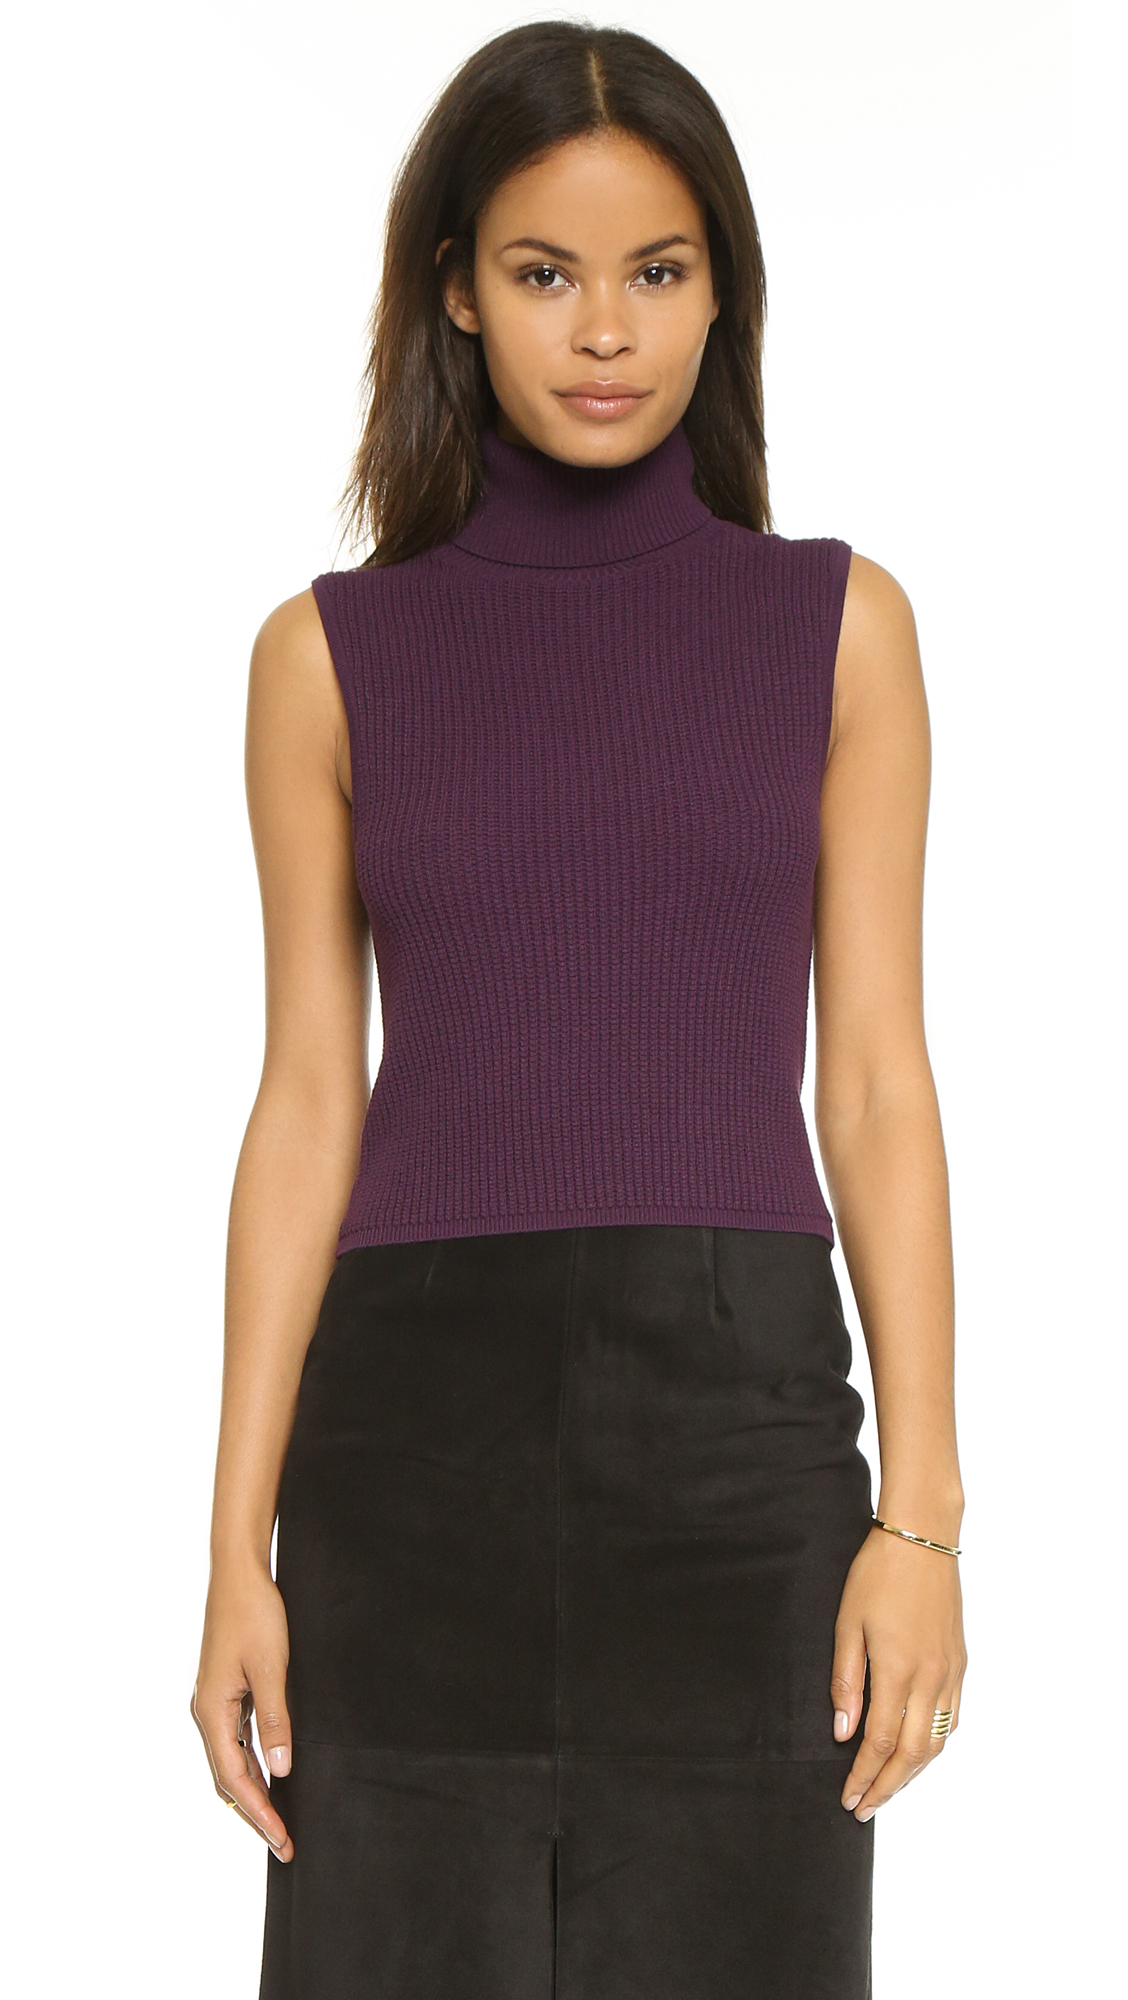 These fit true to size love them purple sleeveless turtleneck Aging. 